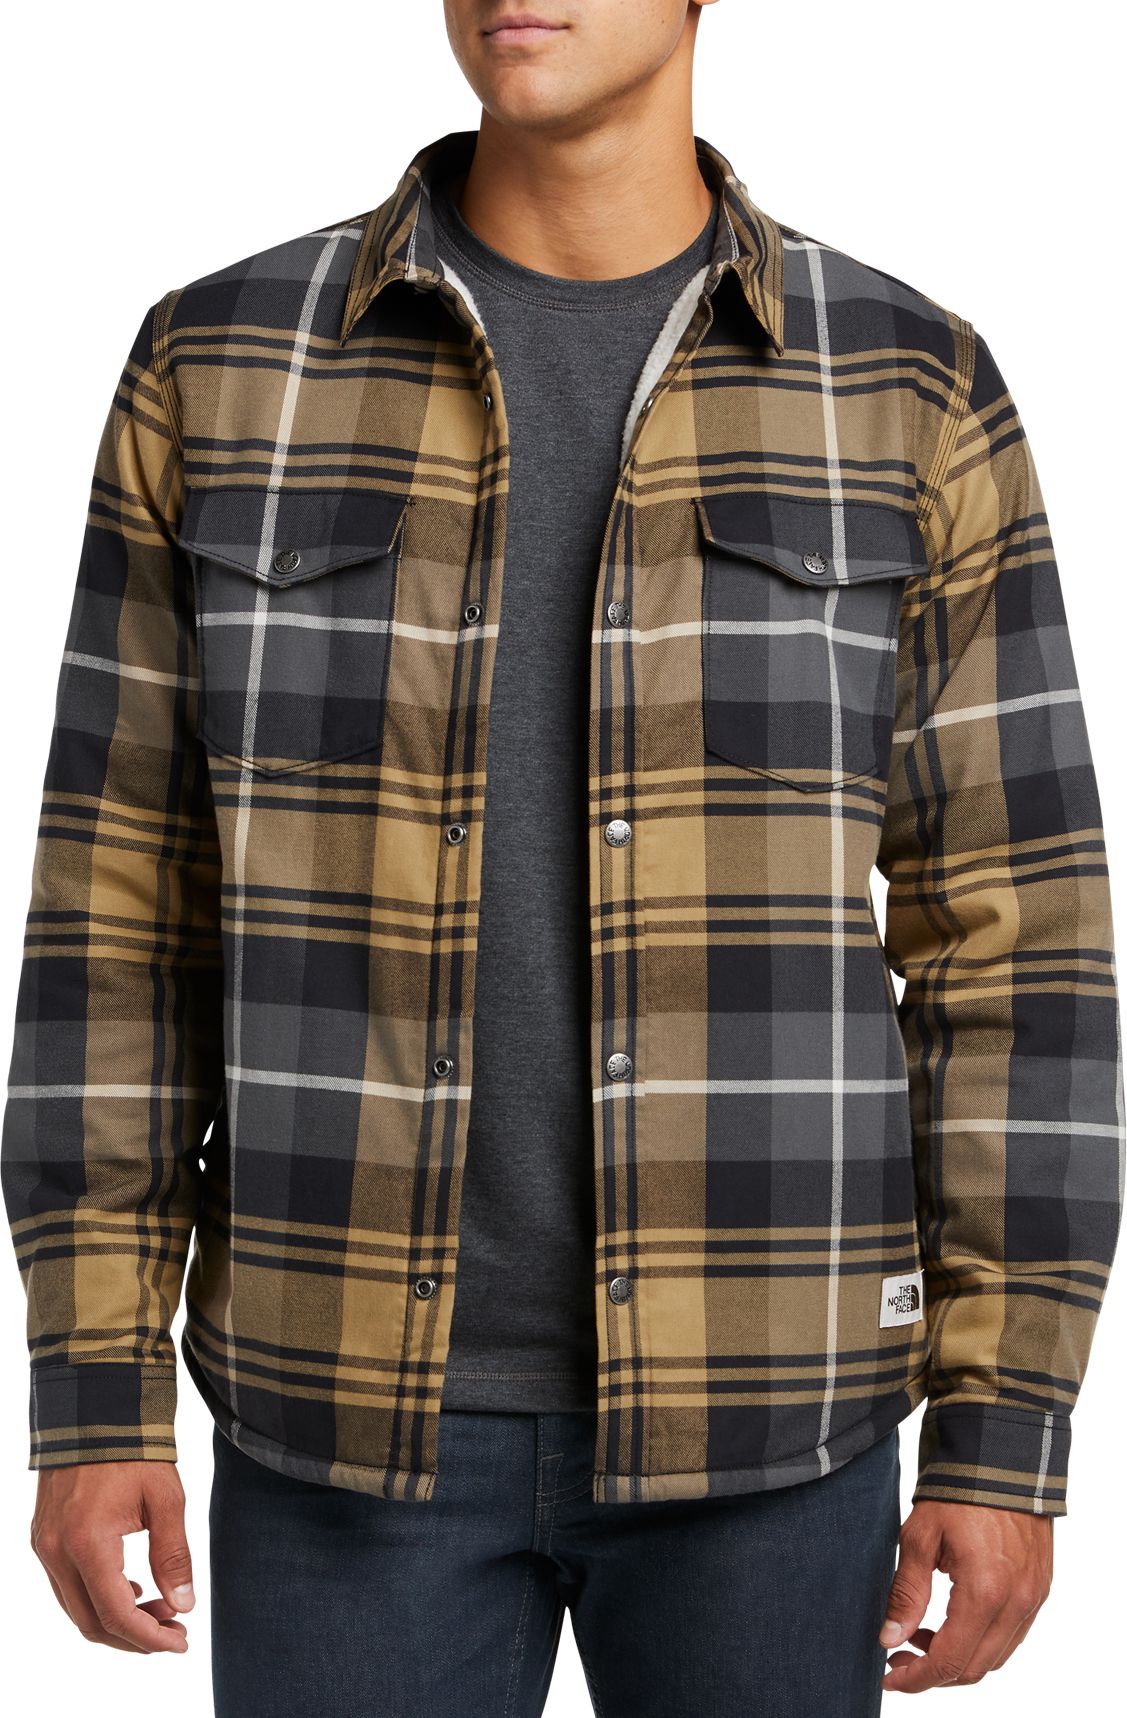 The North Face Men's Campshire Shirt Jacket - .00